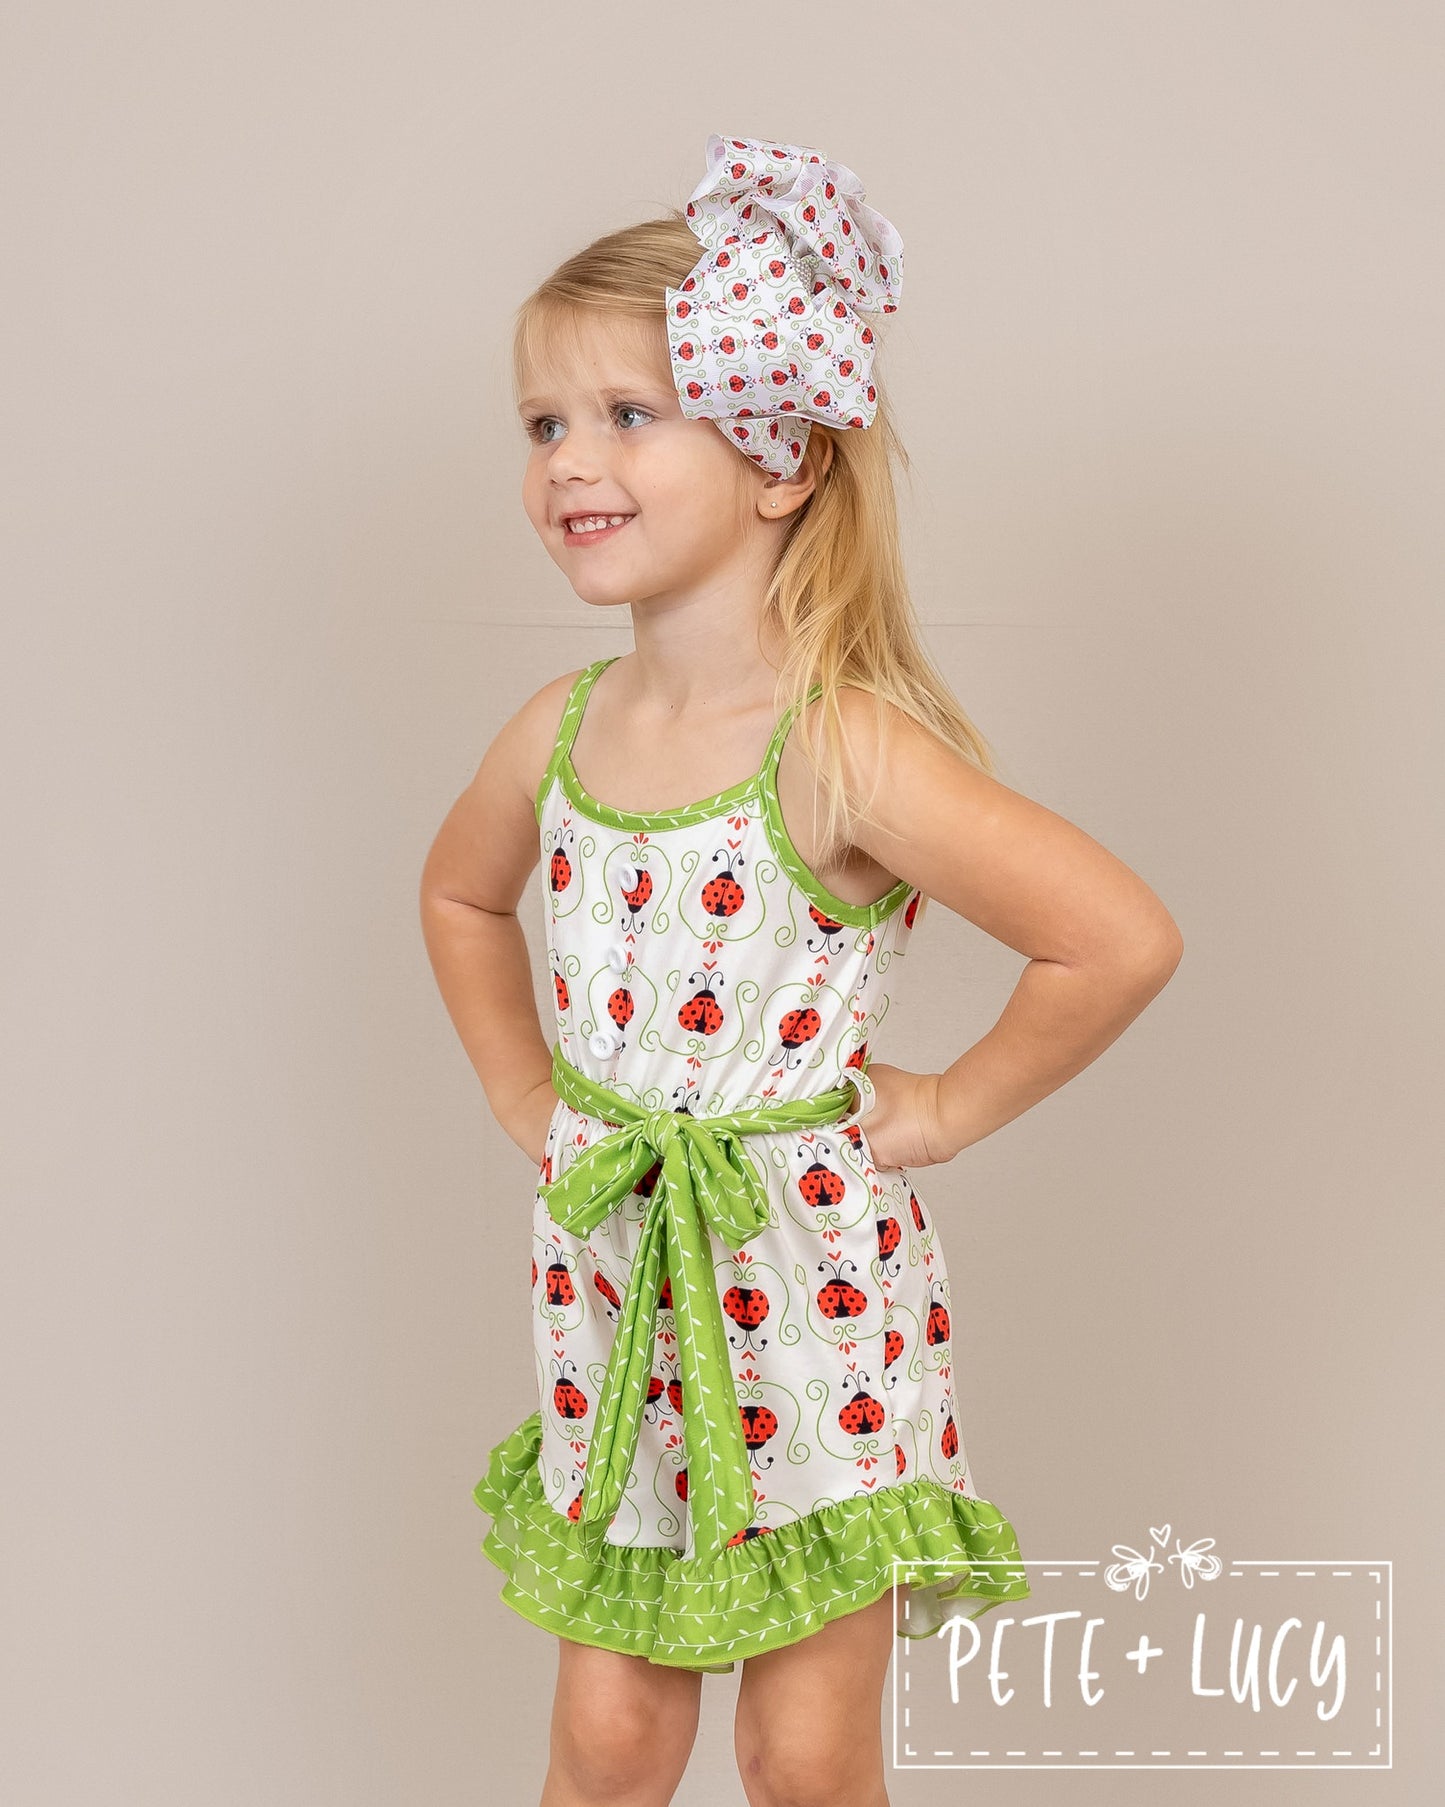 PETE + LUCY Lucky Ladybug Red Green Ruffle Shortie Jumpsuit Romper